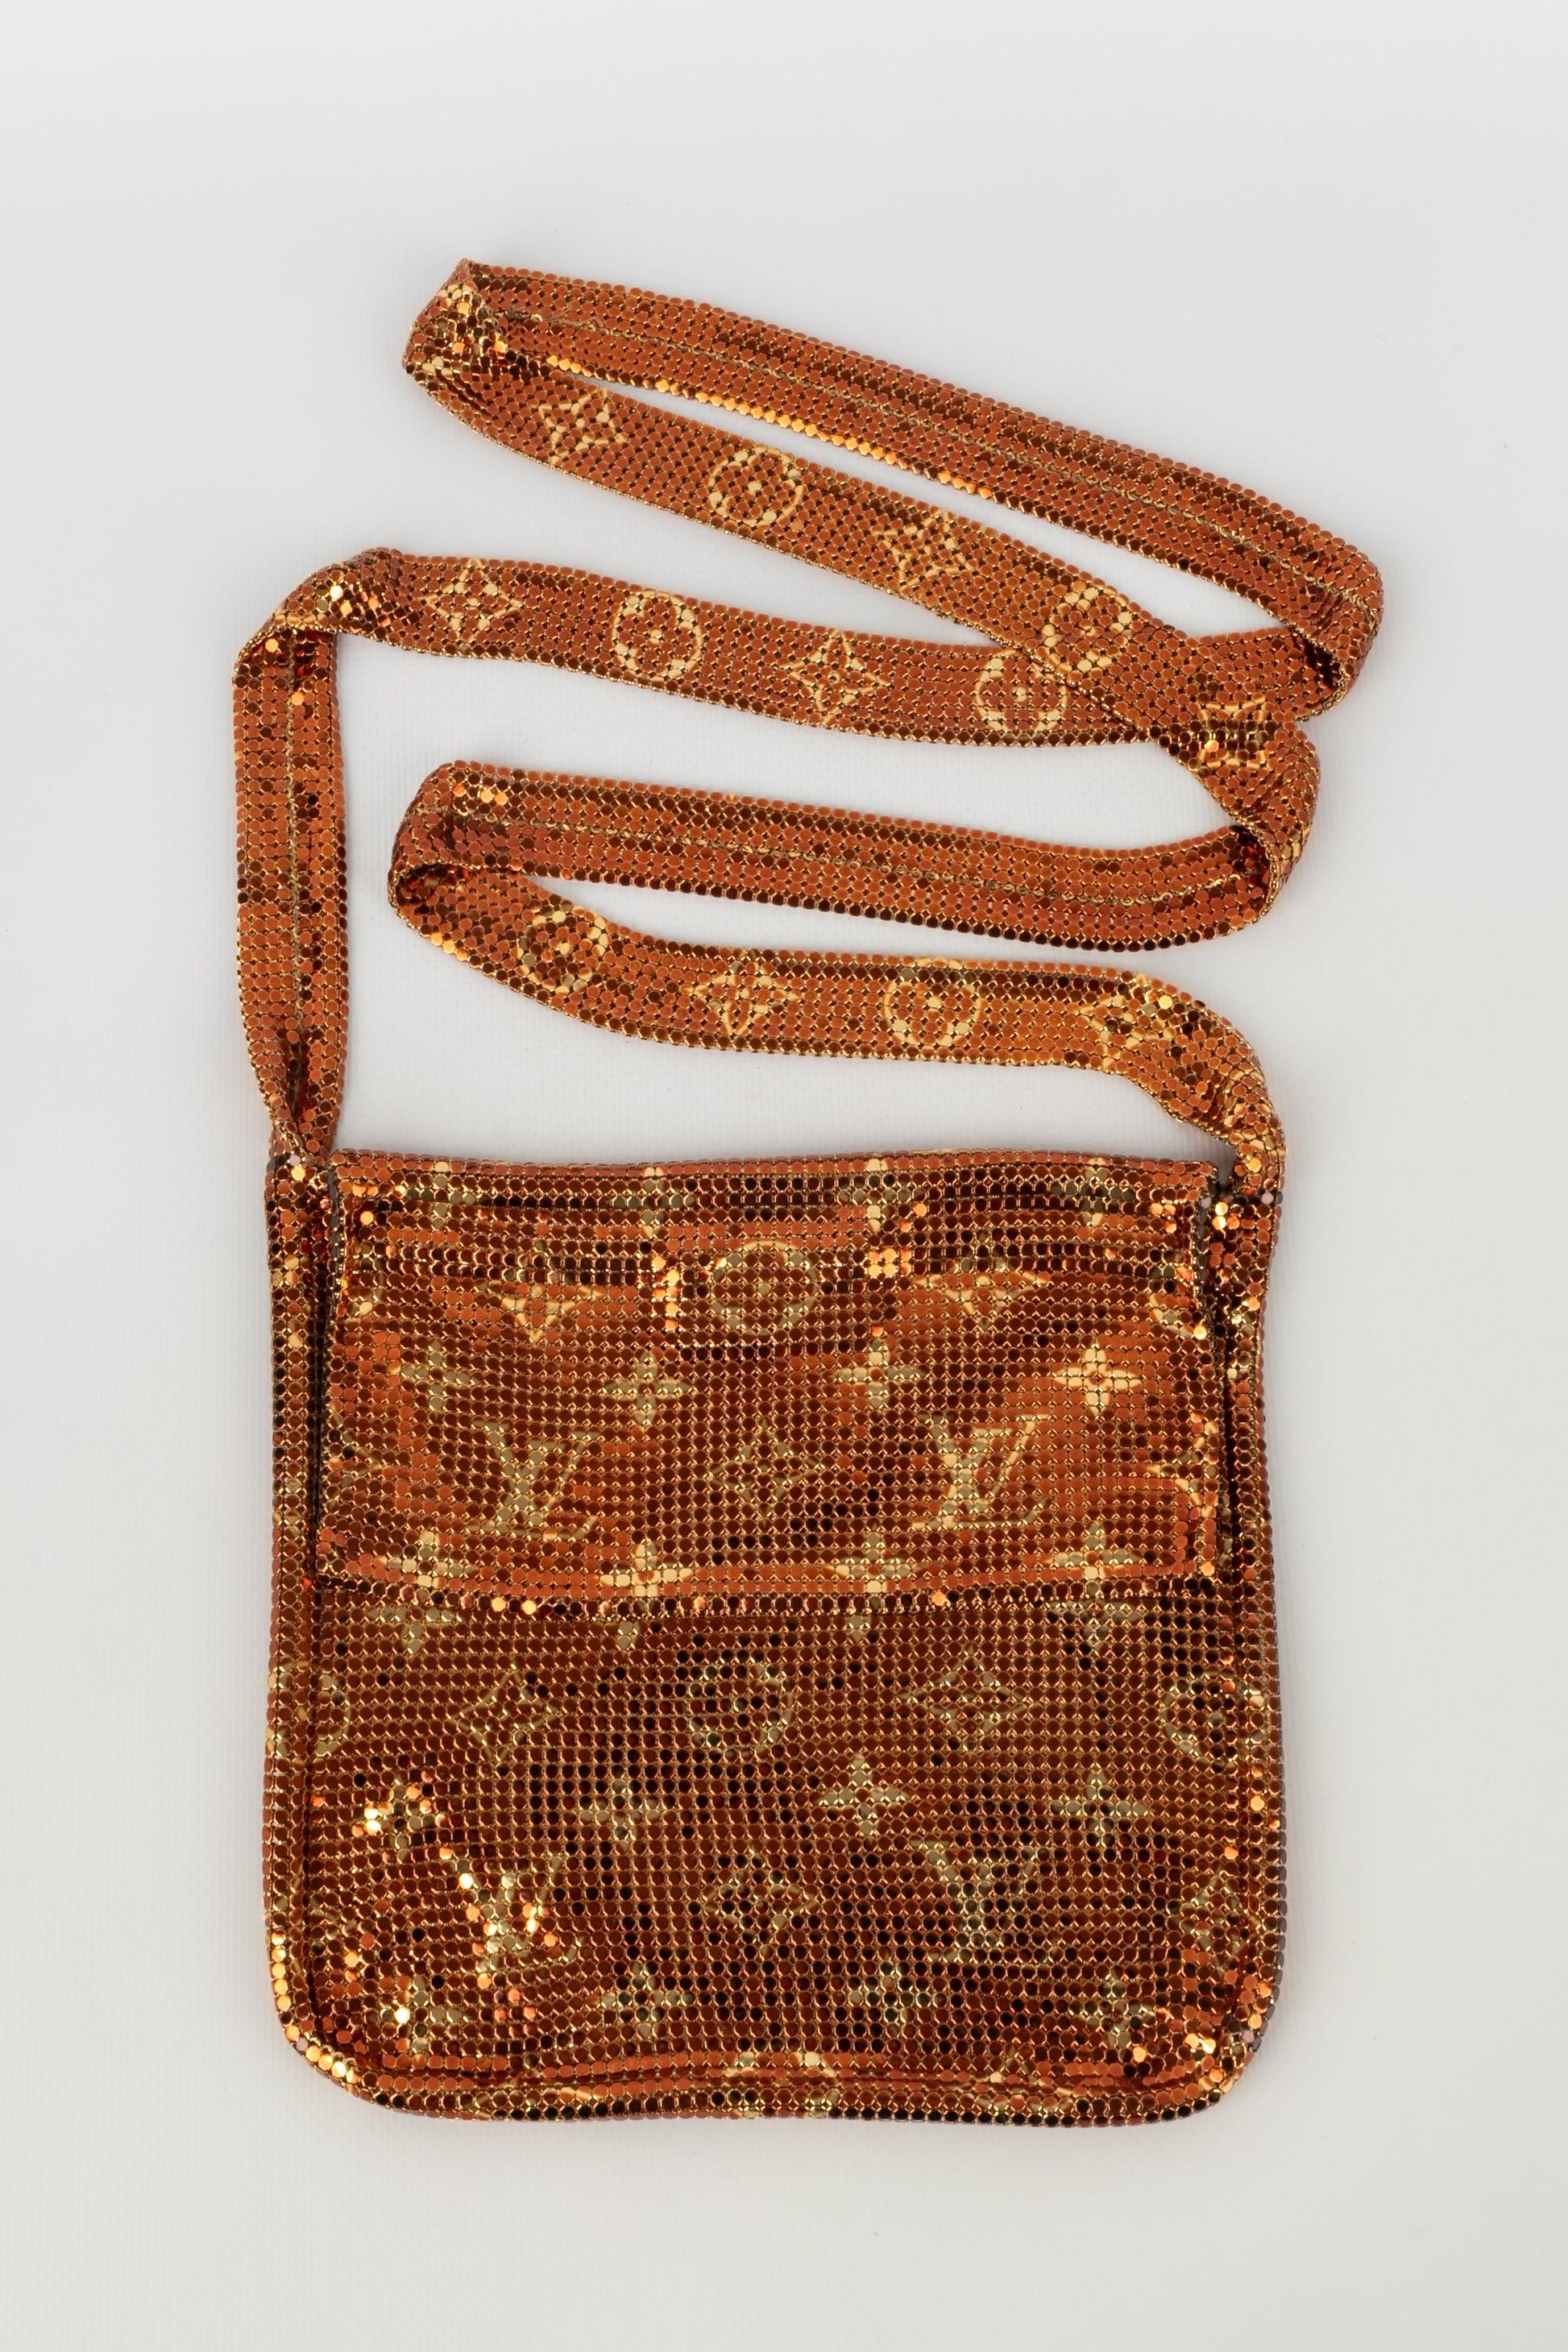 Louis Vuitton - (Made in USA) Small bag in copper and gold monogram ribbed knit. Fall-Winter 2002 collection.

Additional information:
Condition: Very good condition
Dimensions: Height: 18 cm - Width: 19 cm - Depth: 3 cm - Handle: 126 cm
Period: